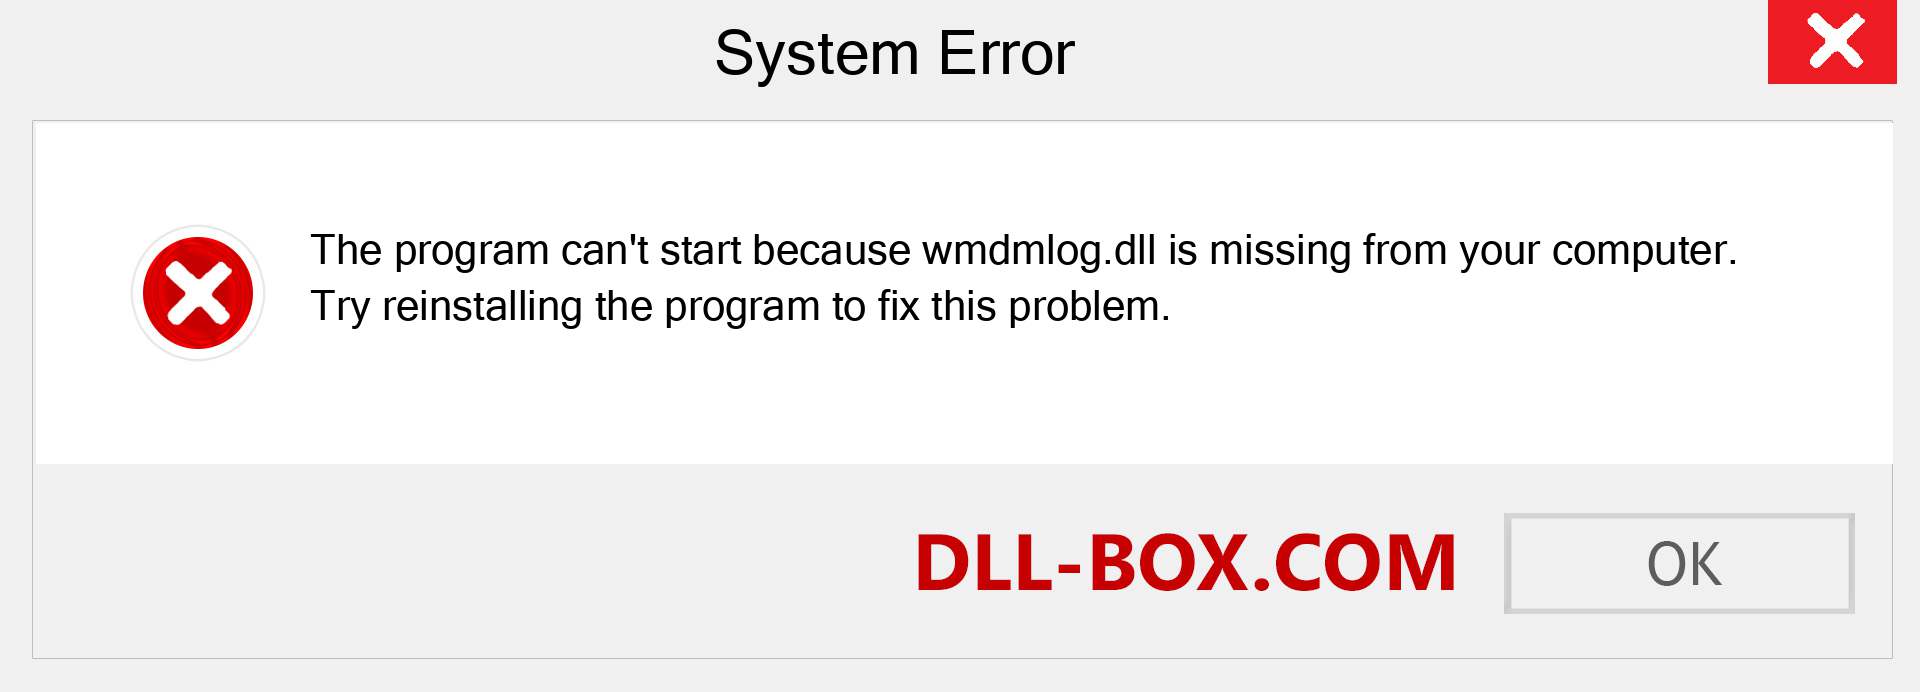  wmdmlog.dll file is missing?. Download for Windows 7, 8, 10 - Fix  wmdmlog dll Missing Error on Windows, photos, images